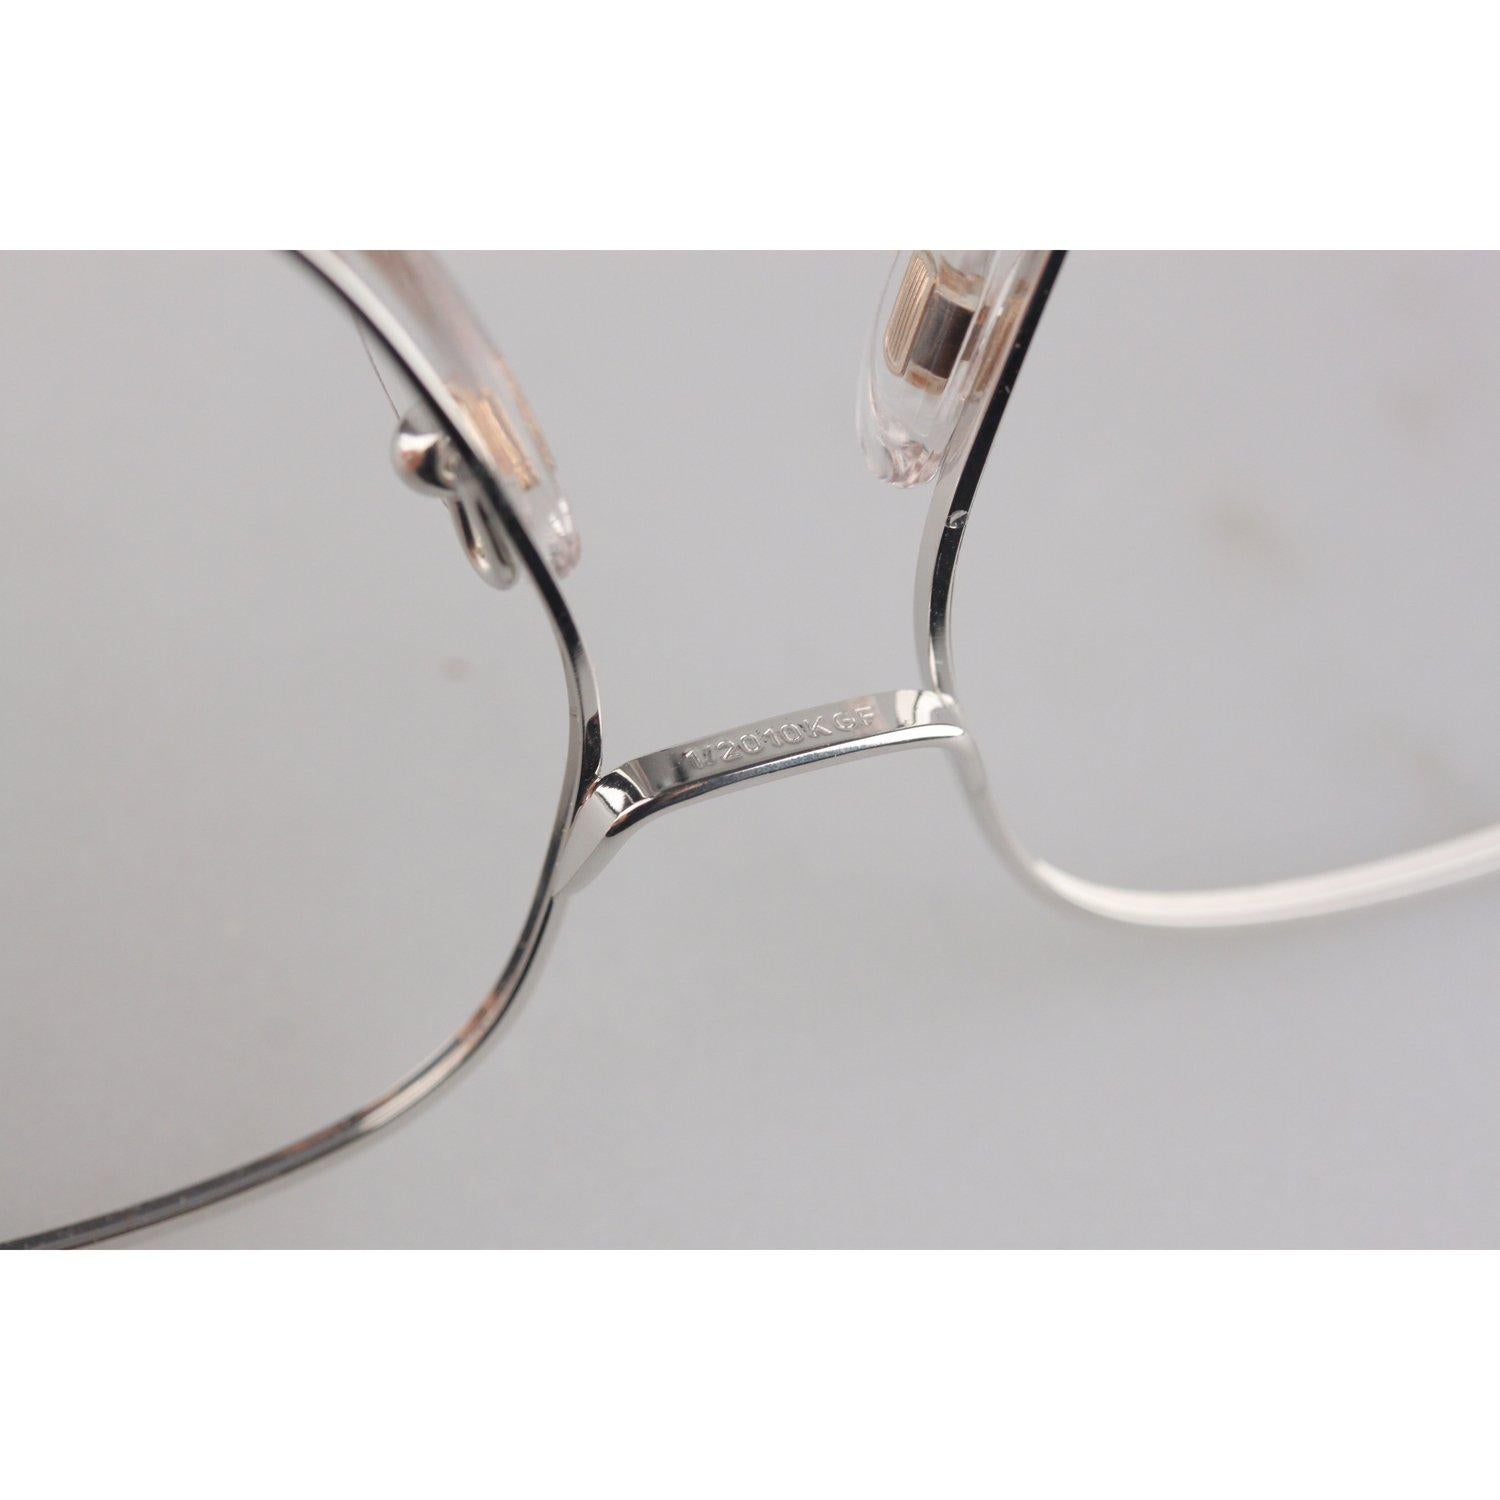 Vogue D'Or by Bausch & Lomb 1/20 10K GF White-Gold Mint Eyeglasses 520 1